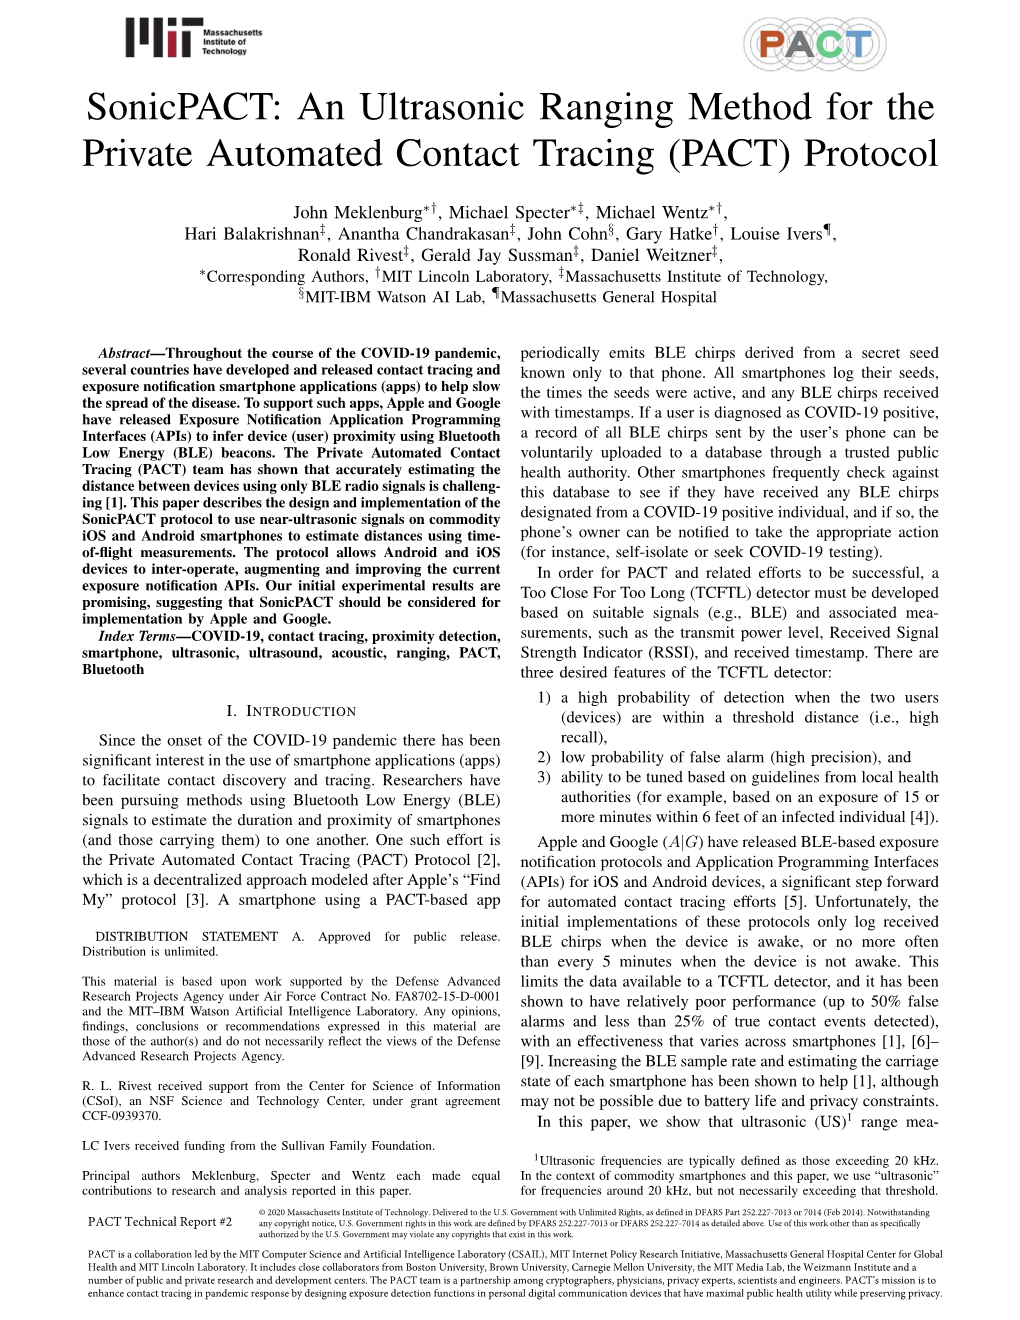 Sonicpact: an Ultrasonic Ranging Method for the Private Automated Contact Tracing (PACT) Protocol